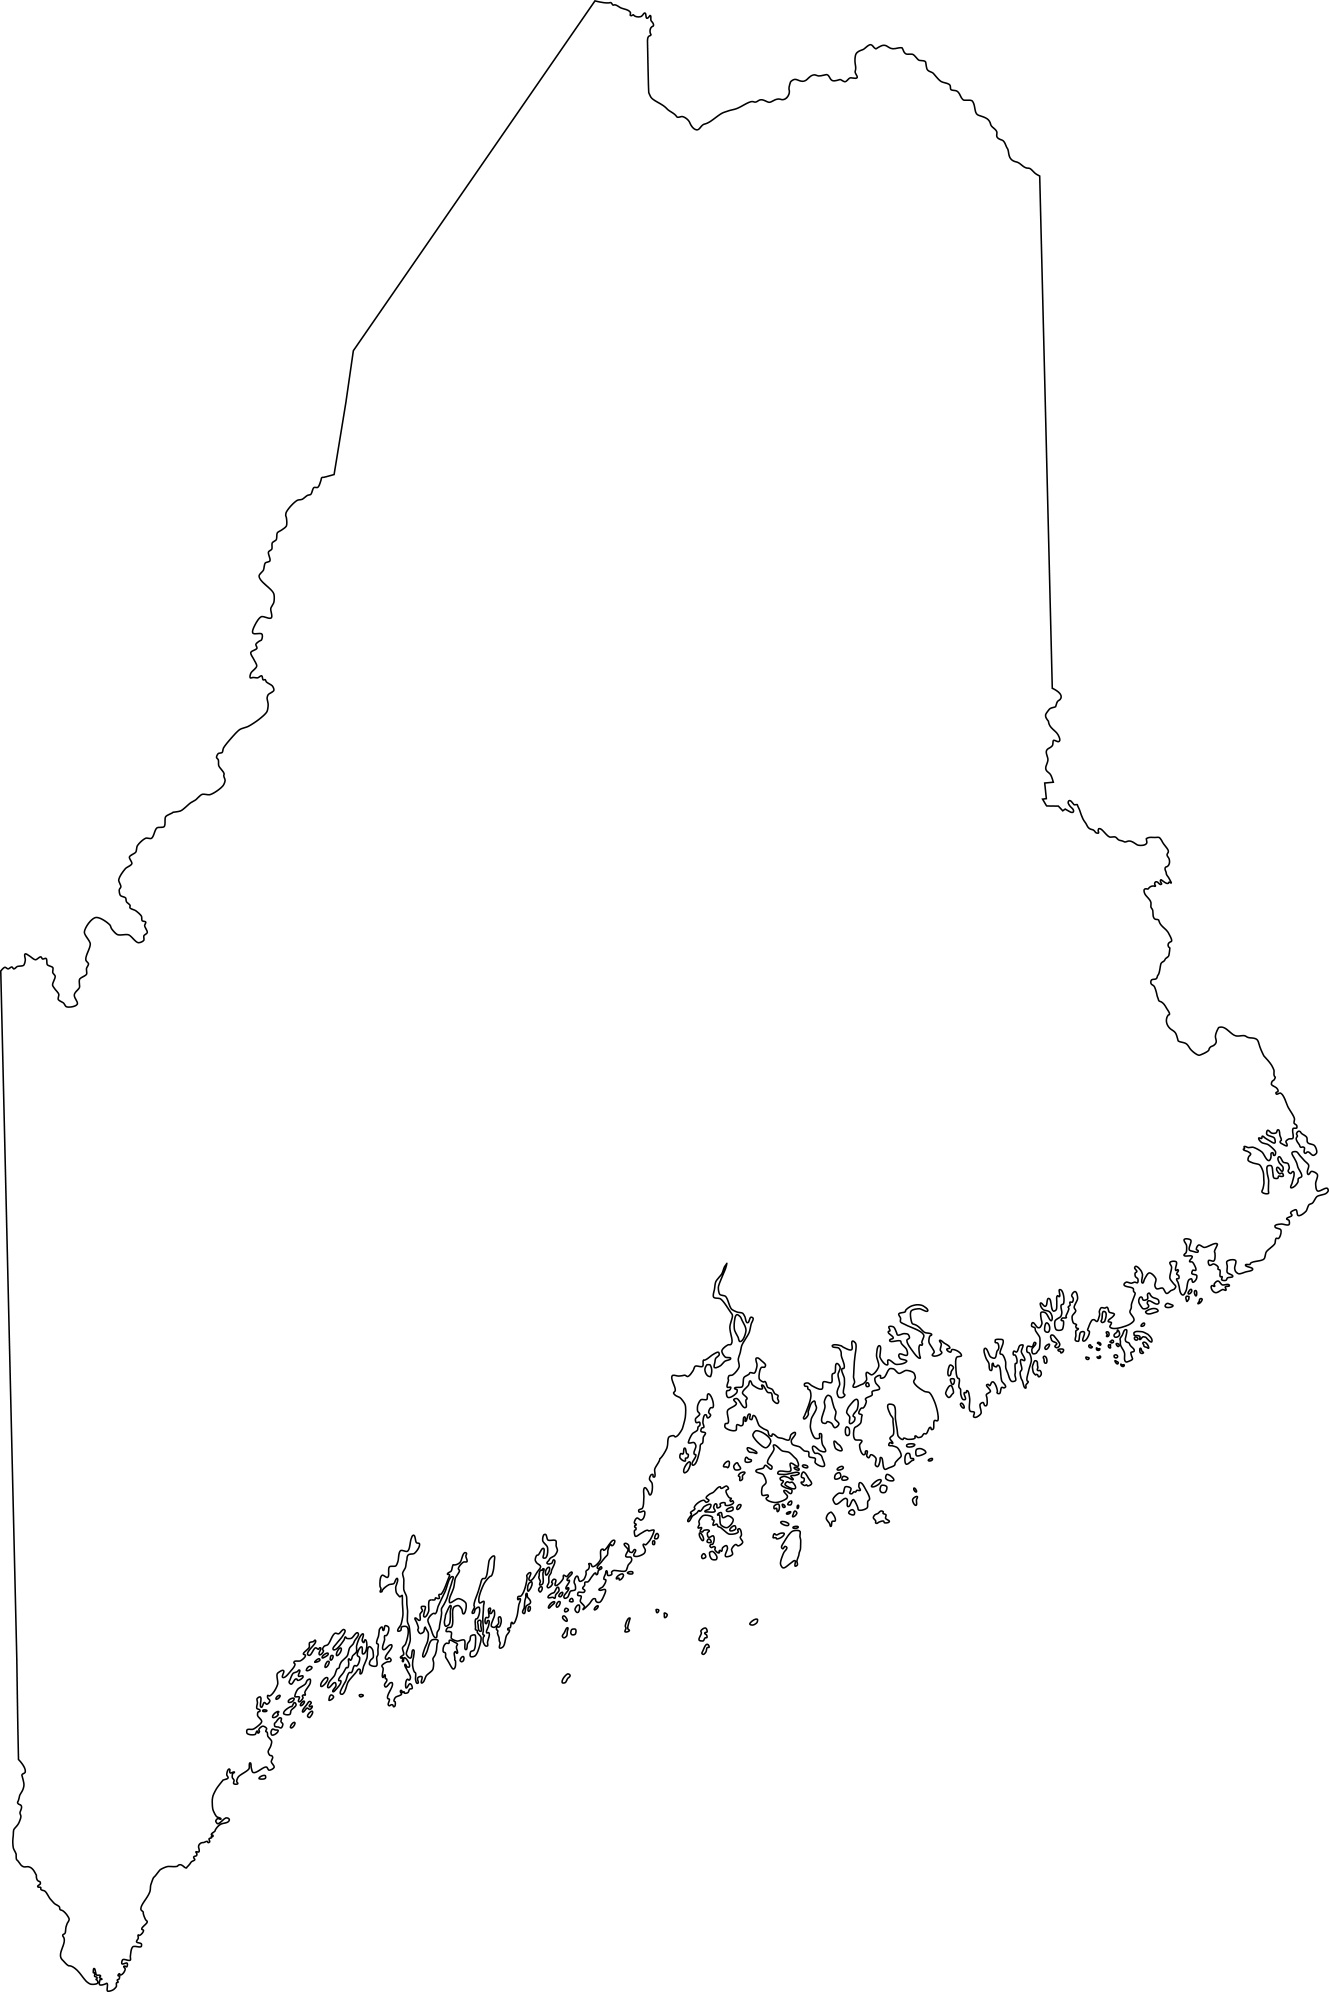 Maine Blank Outline Map | Large Printable High Resolution and Standard Map